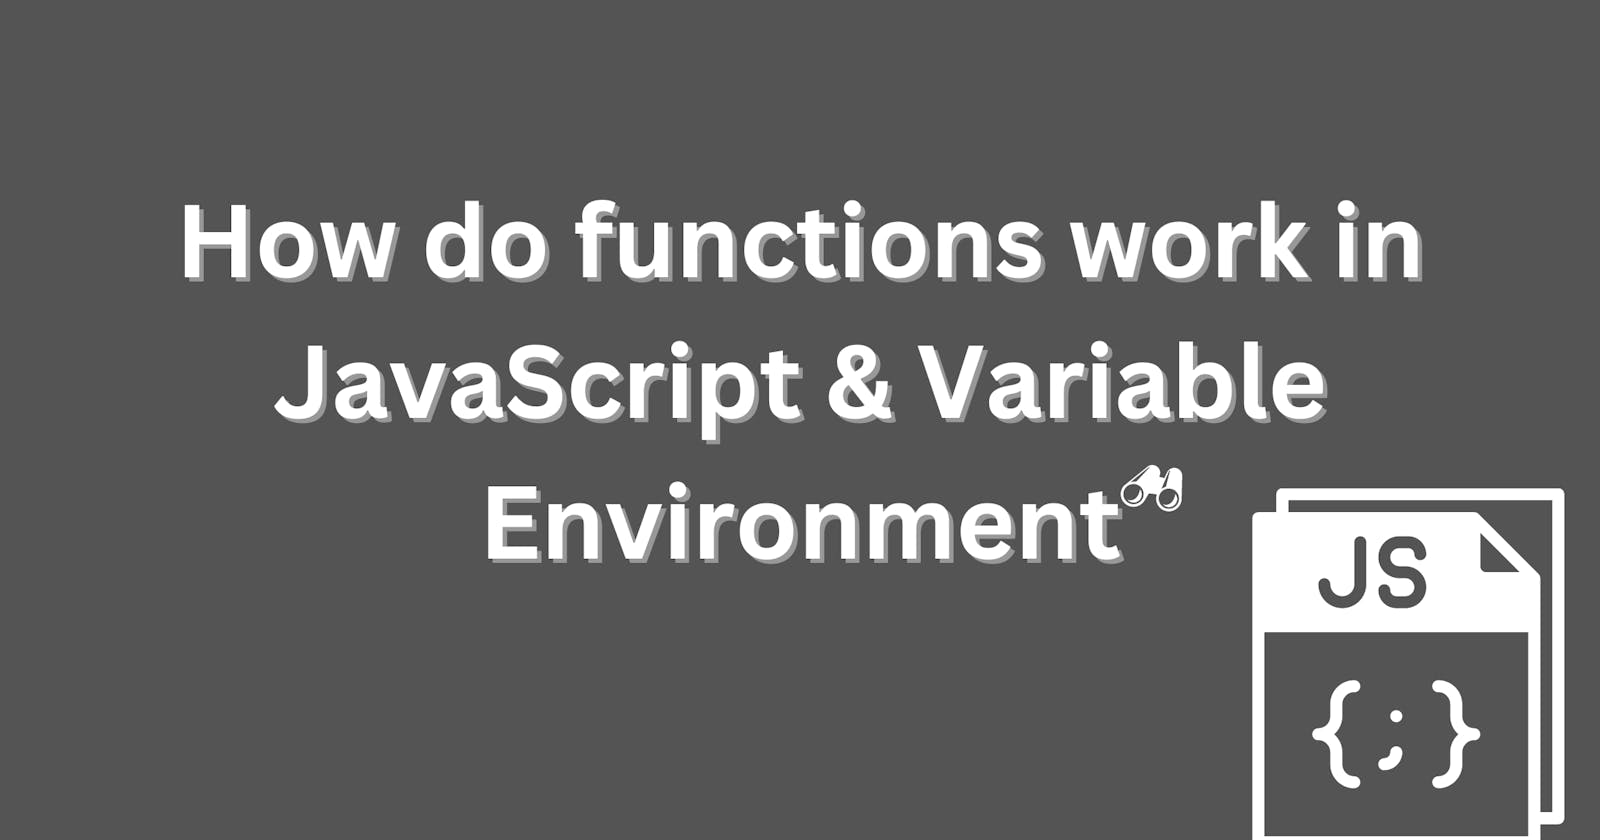 How do functions work in JavaScript & Variable Environment?